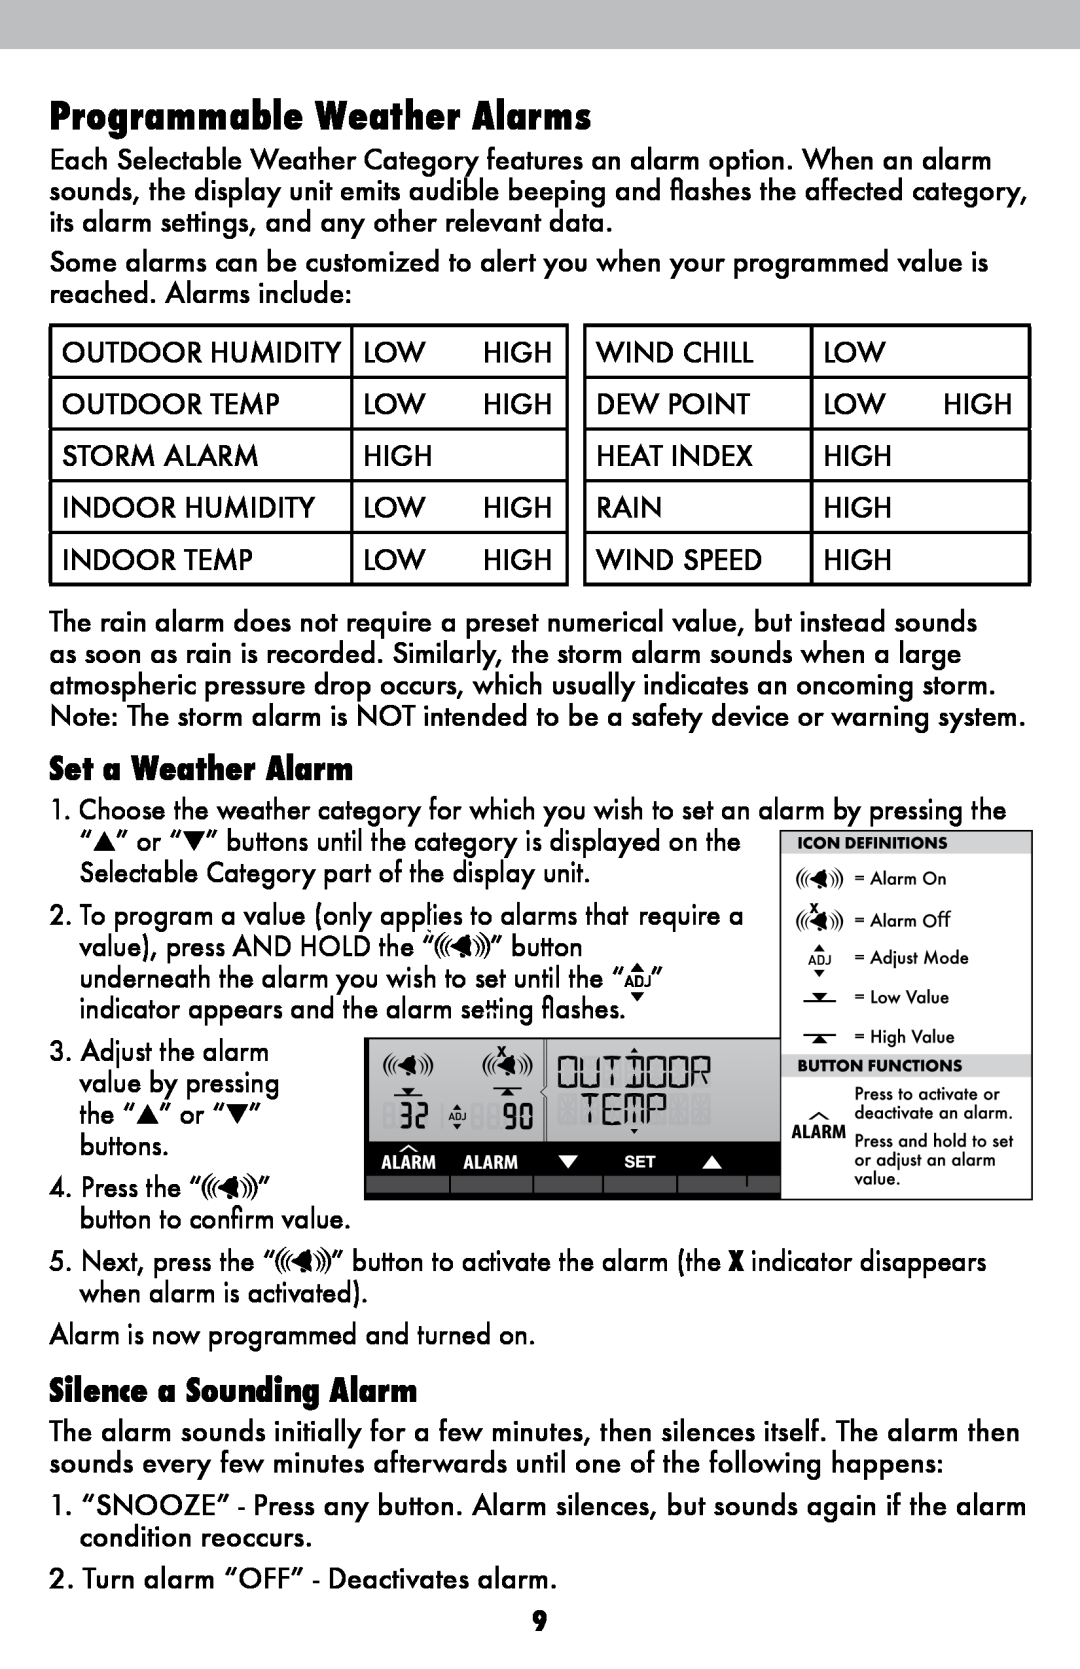 Acu-Rite 06007RM/1015RX instruction manual Programmable Weather Alarms, Set a Weather Alarm, Silence a Sounding Alarm 